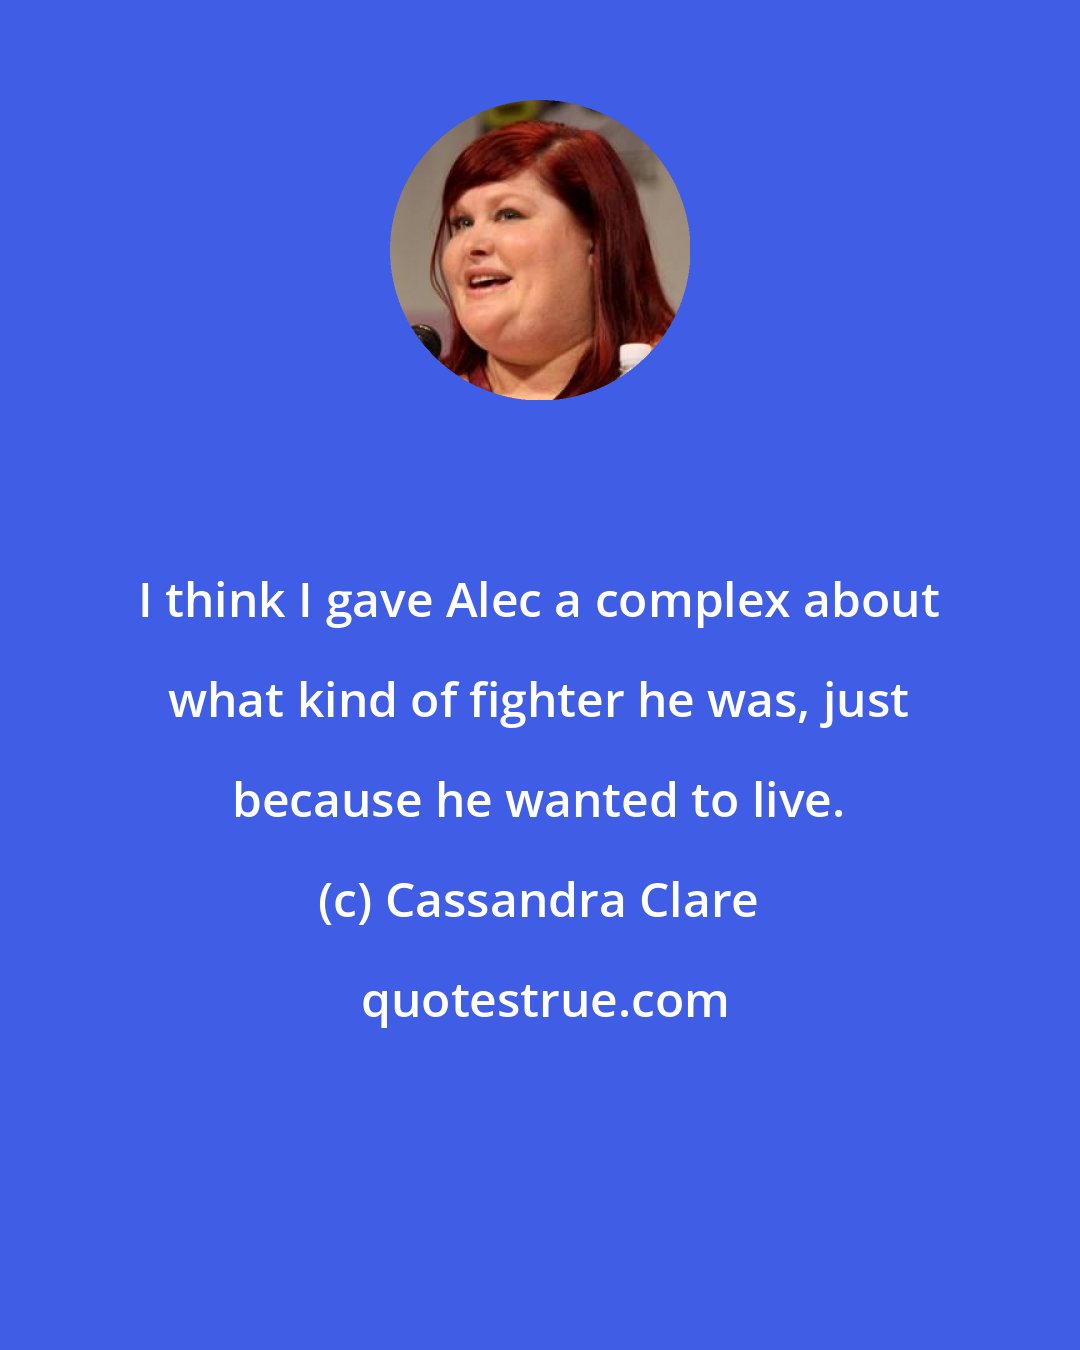 Cassandra Clare: I think I gave Alec a complex about what kind of fighter he was, just because he wanted to live.